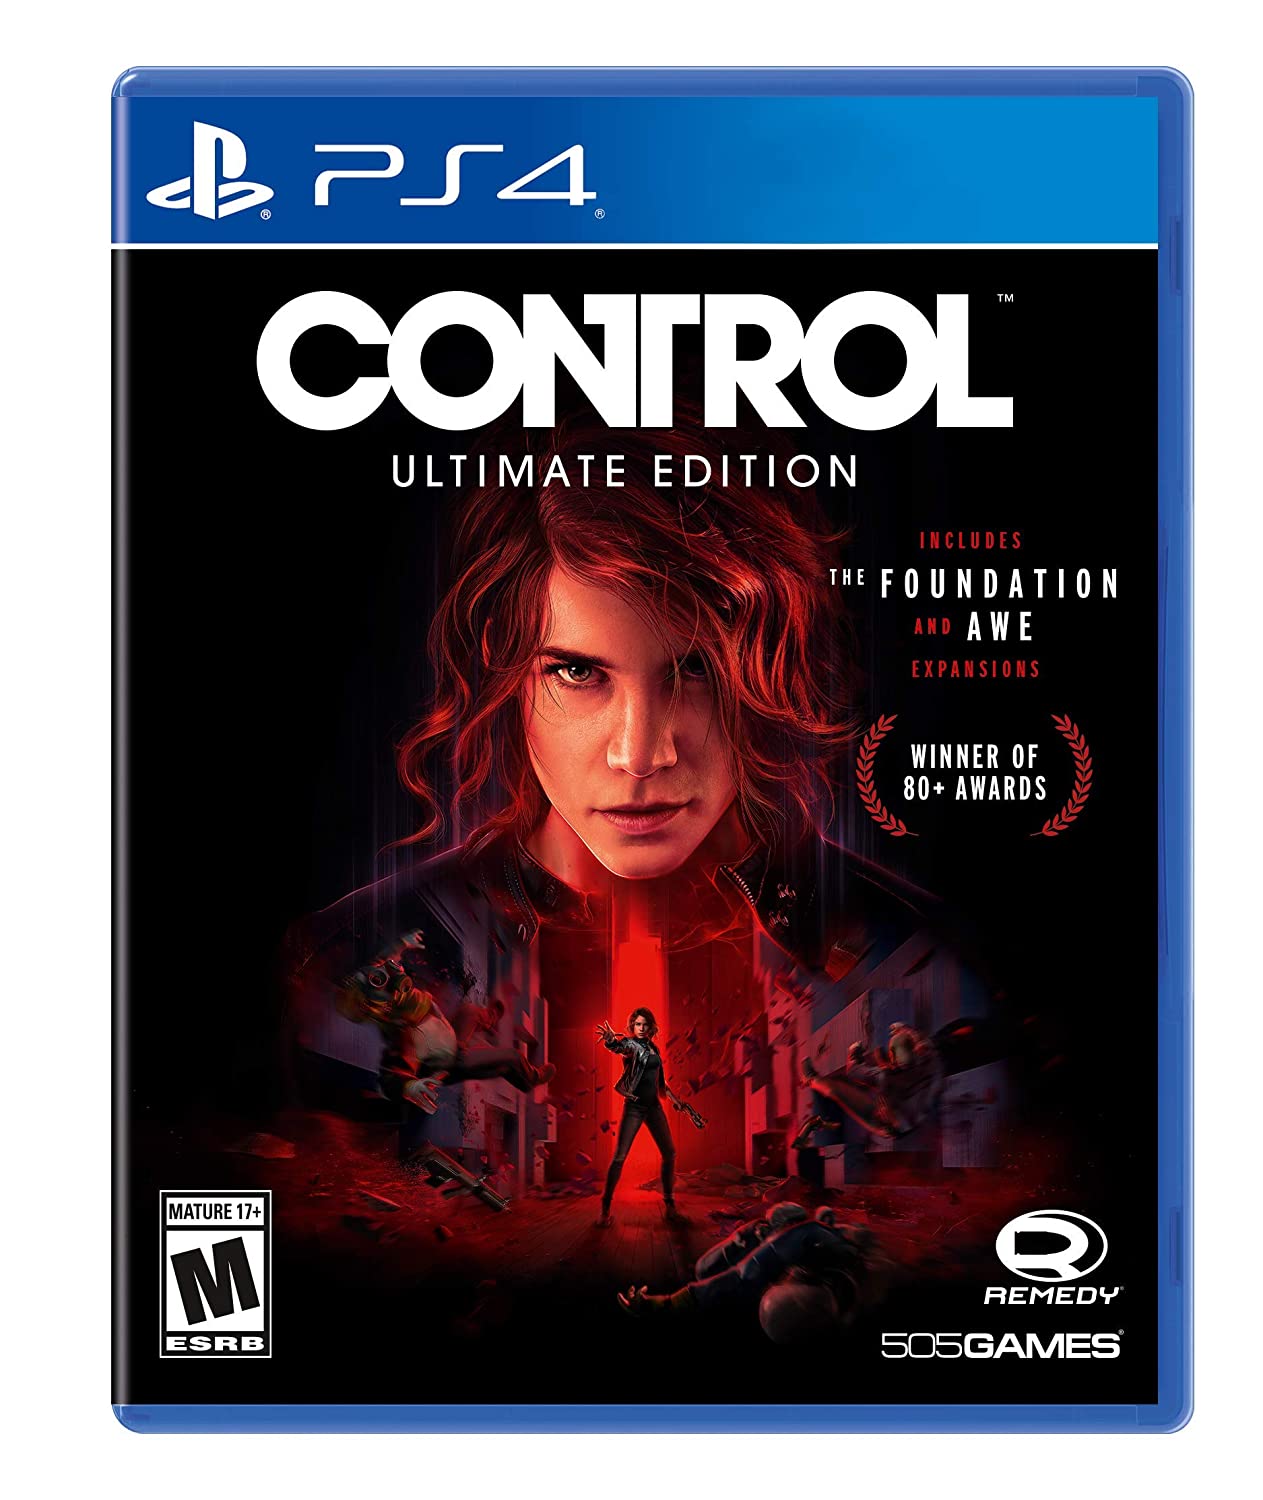 Control - Ultimate Edition (Xbox One)